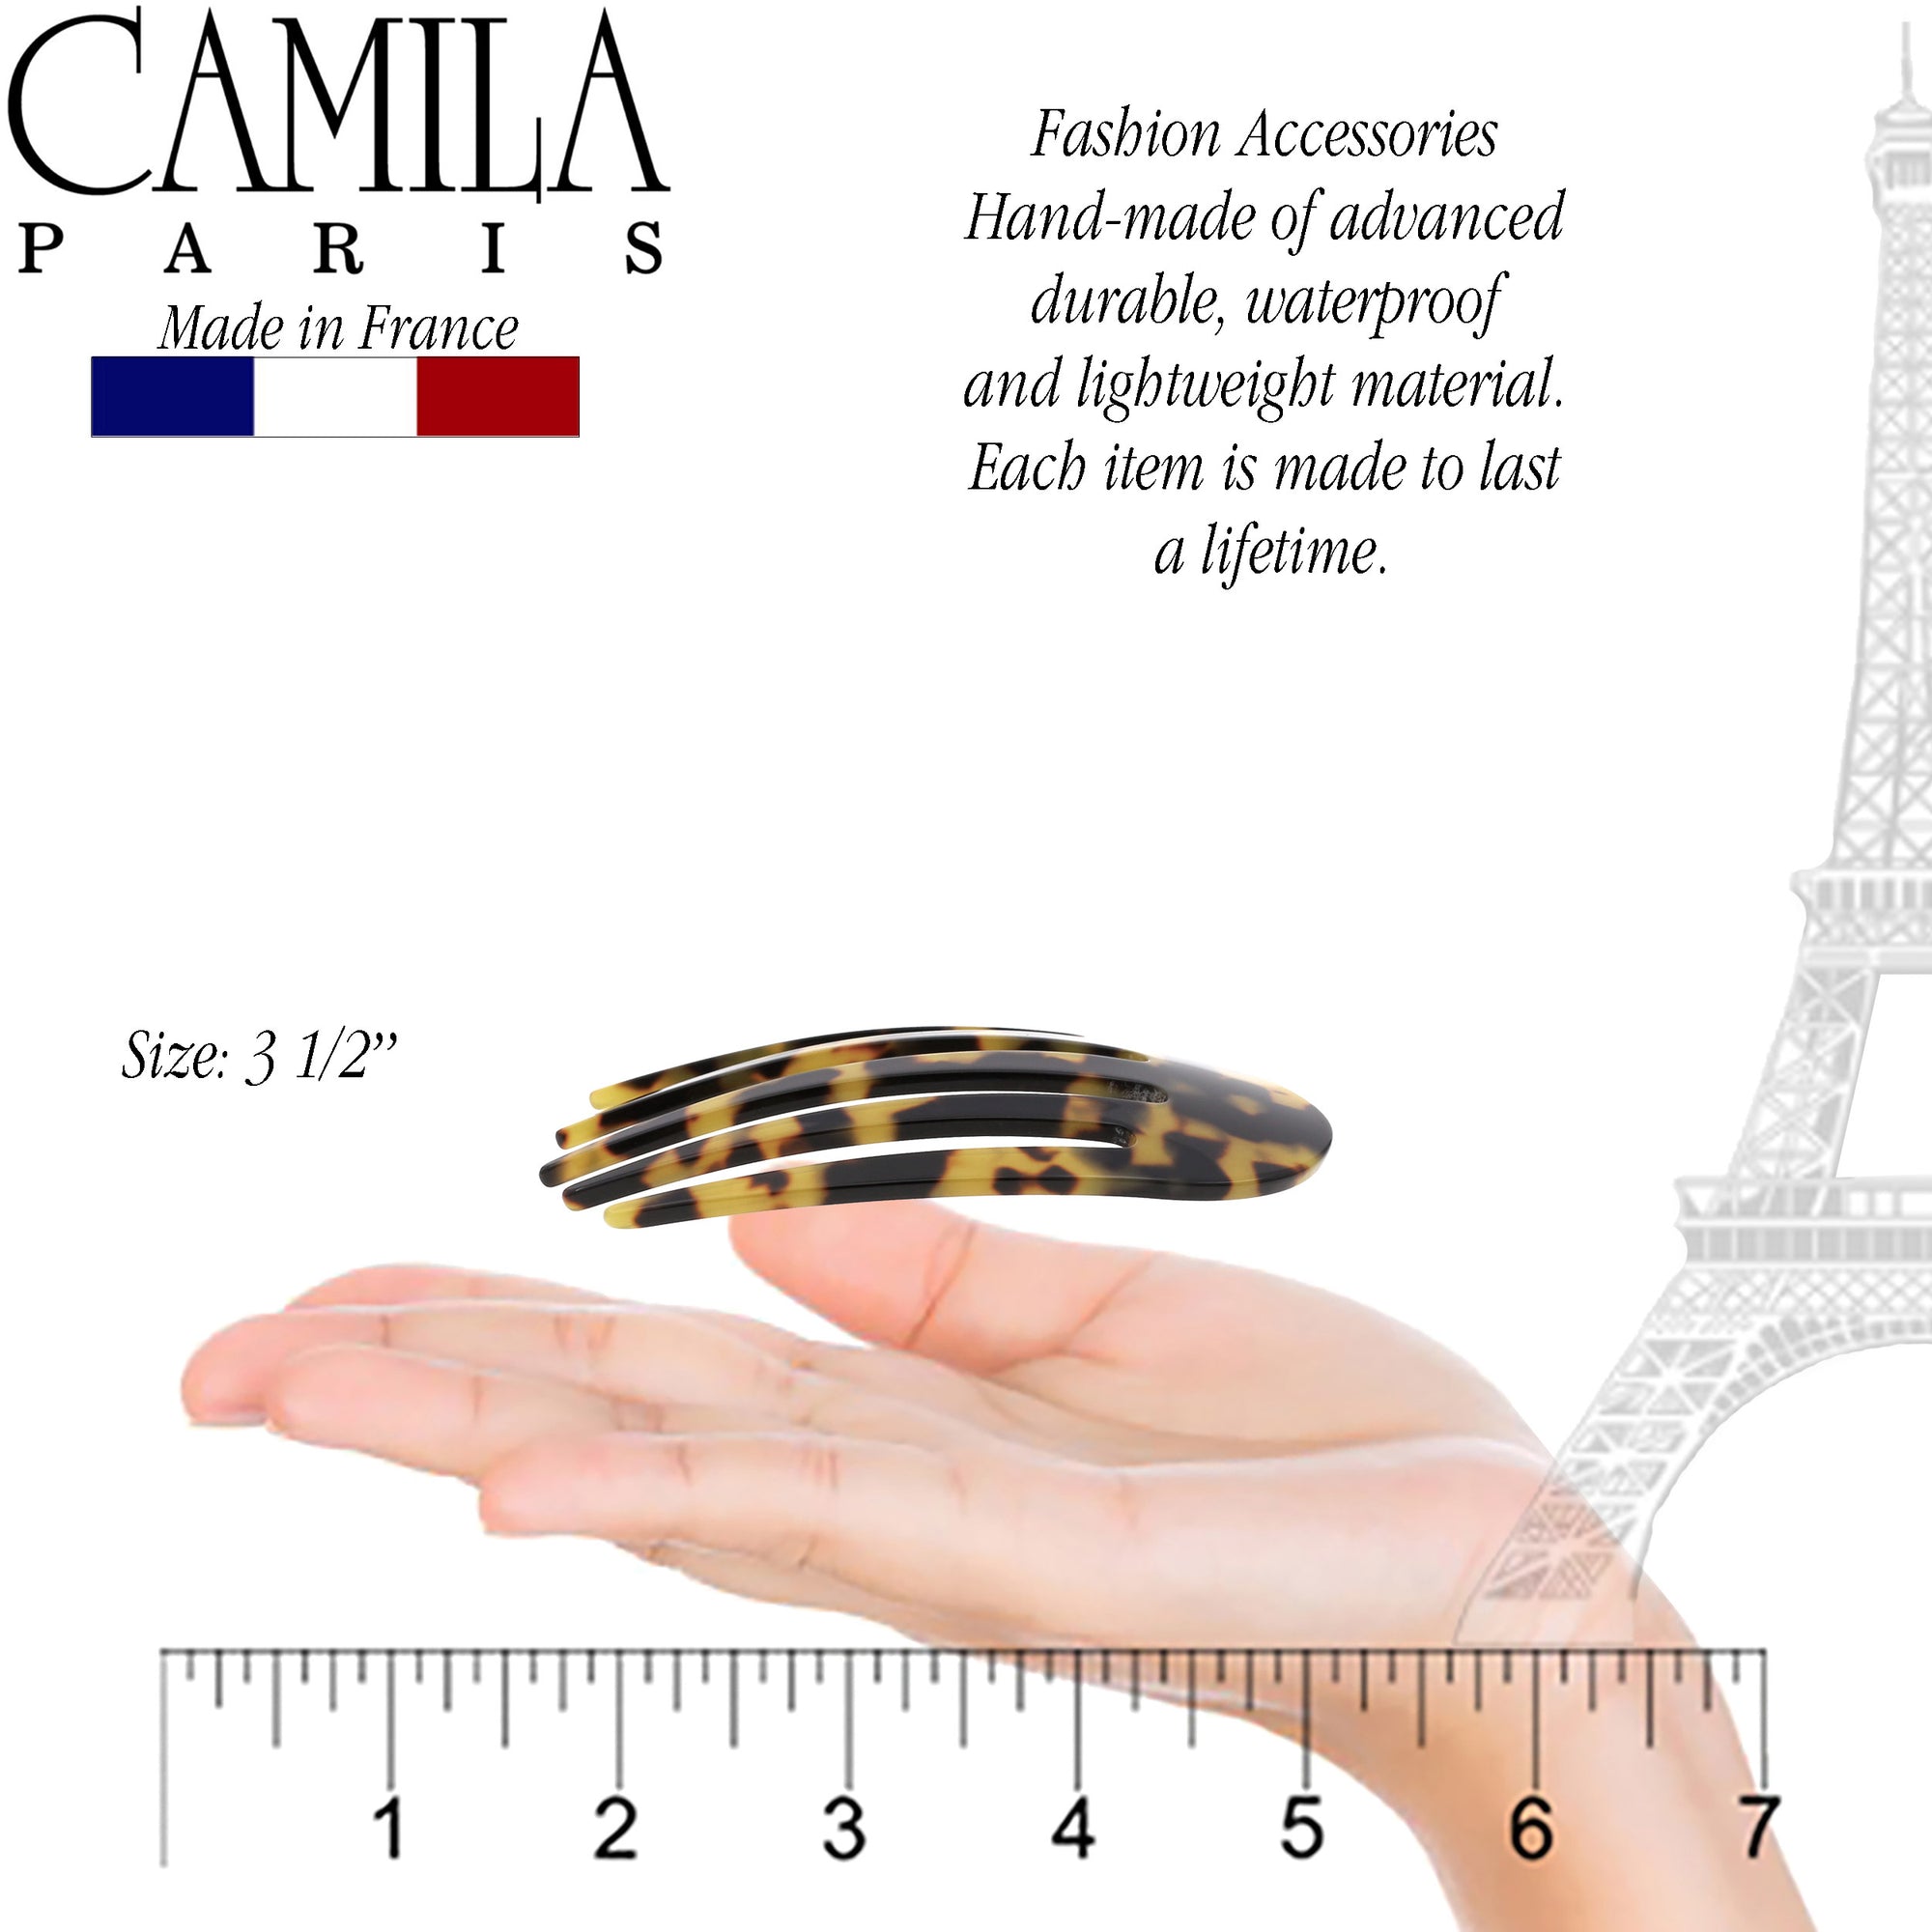 Camila Paris Small Decorative Round Hair Side Comb. Made in France